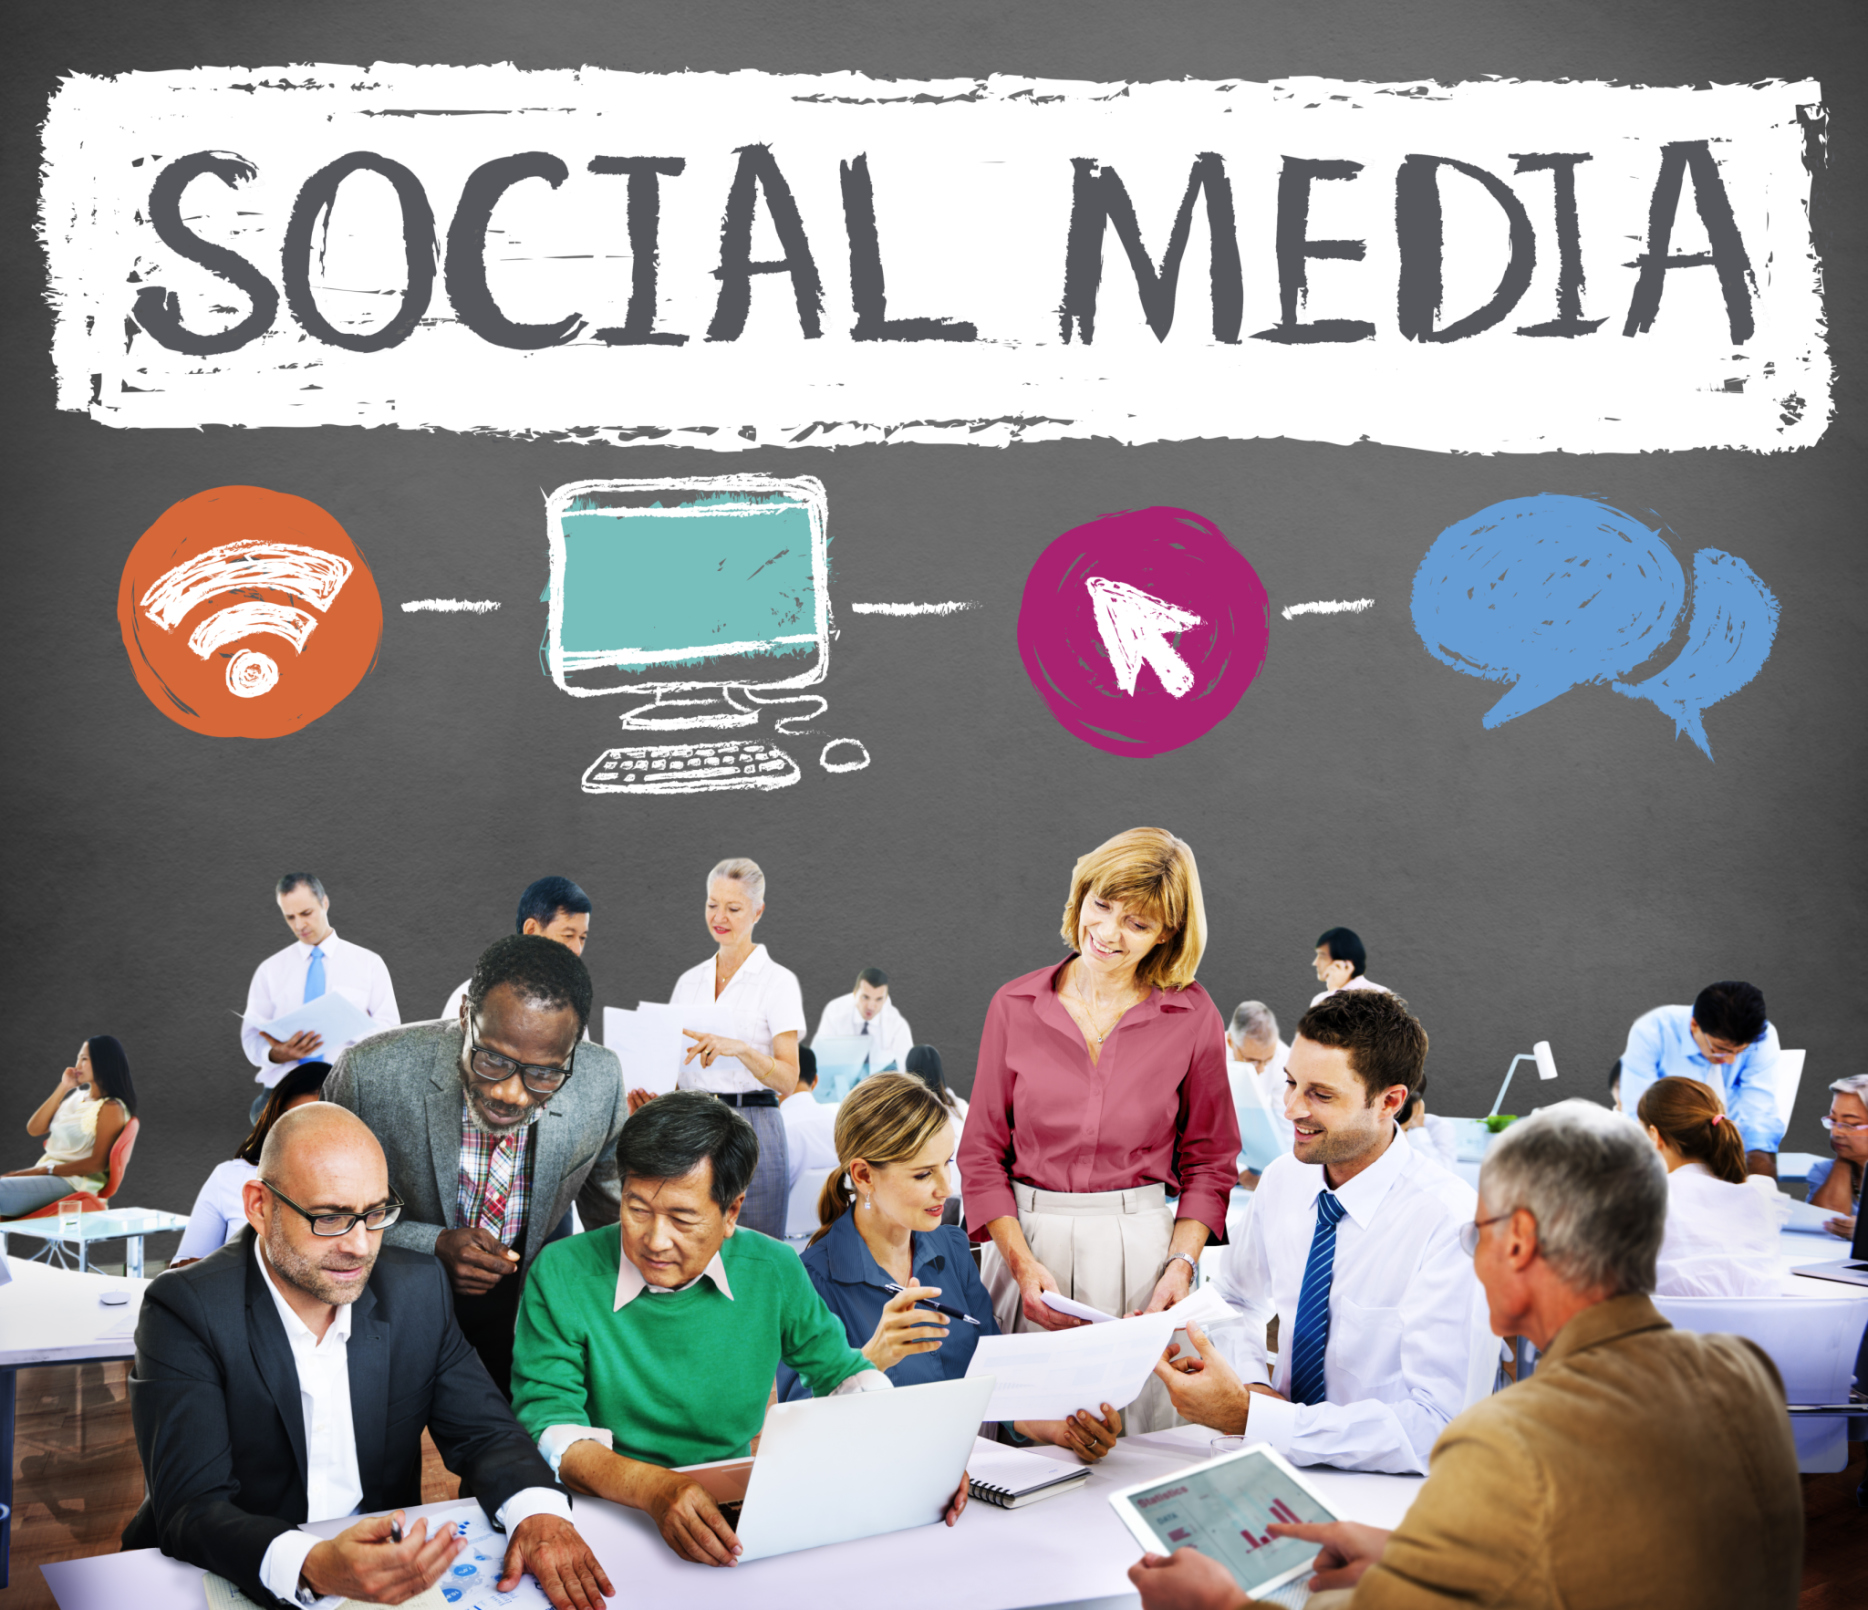 Do You What It Takes To Be Social Media Expert